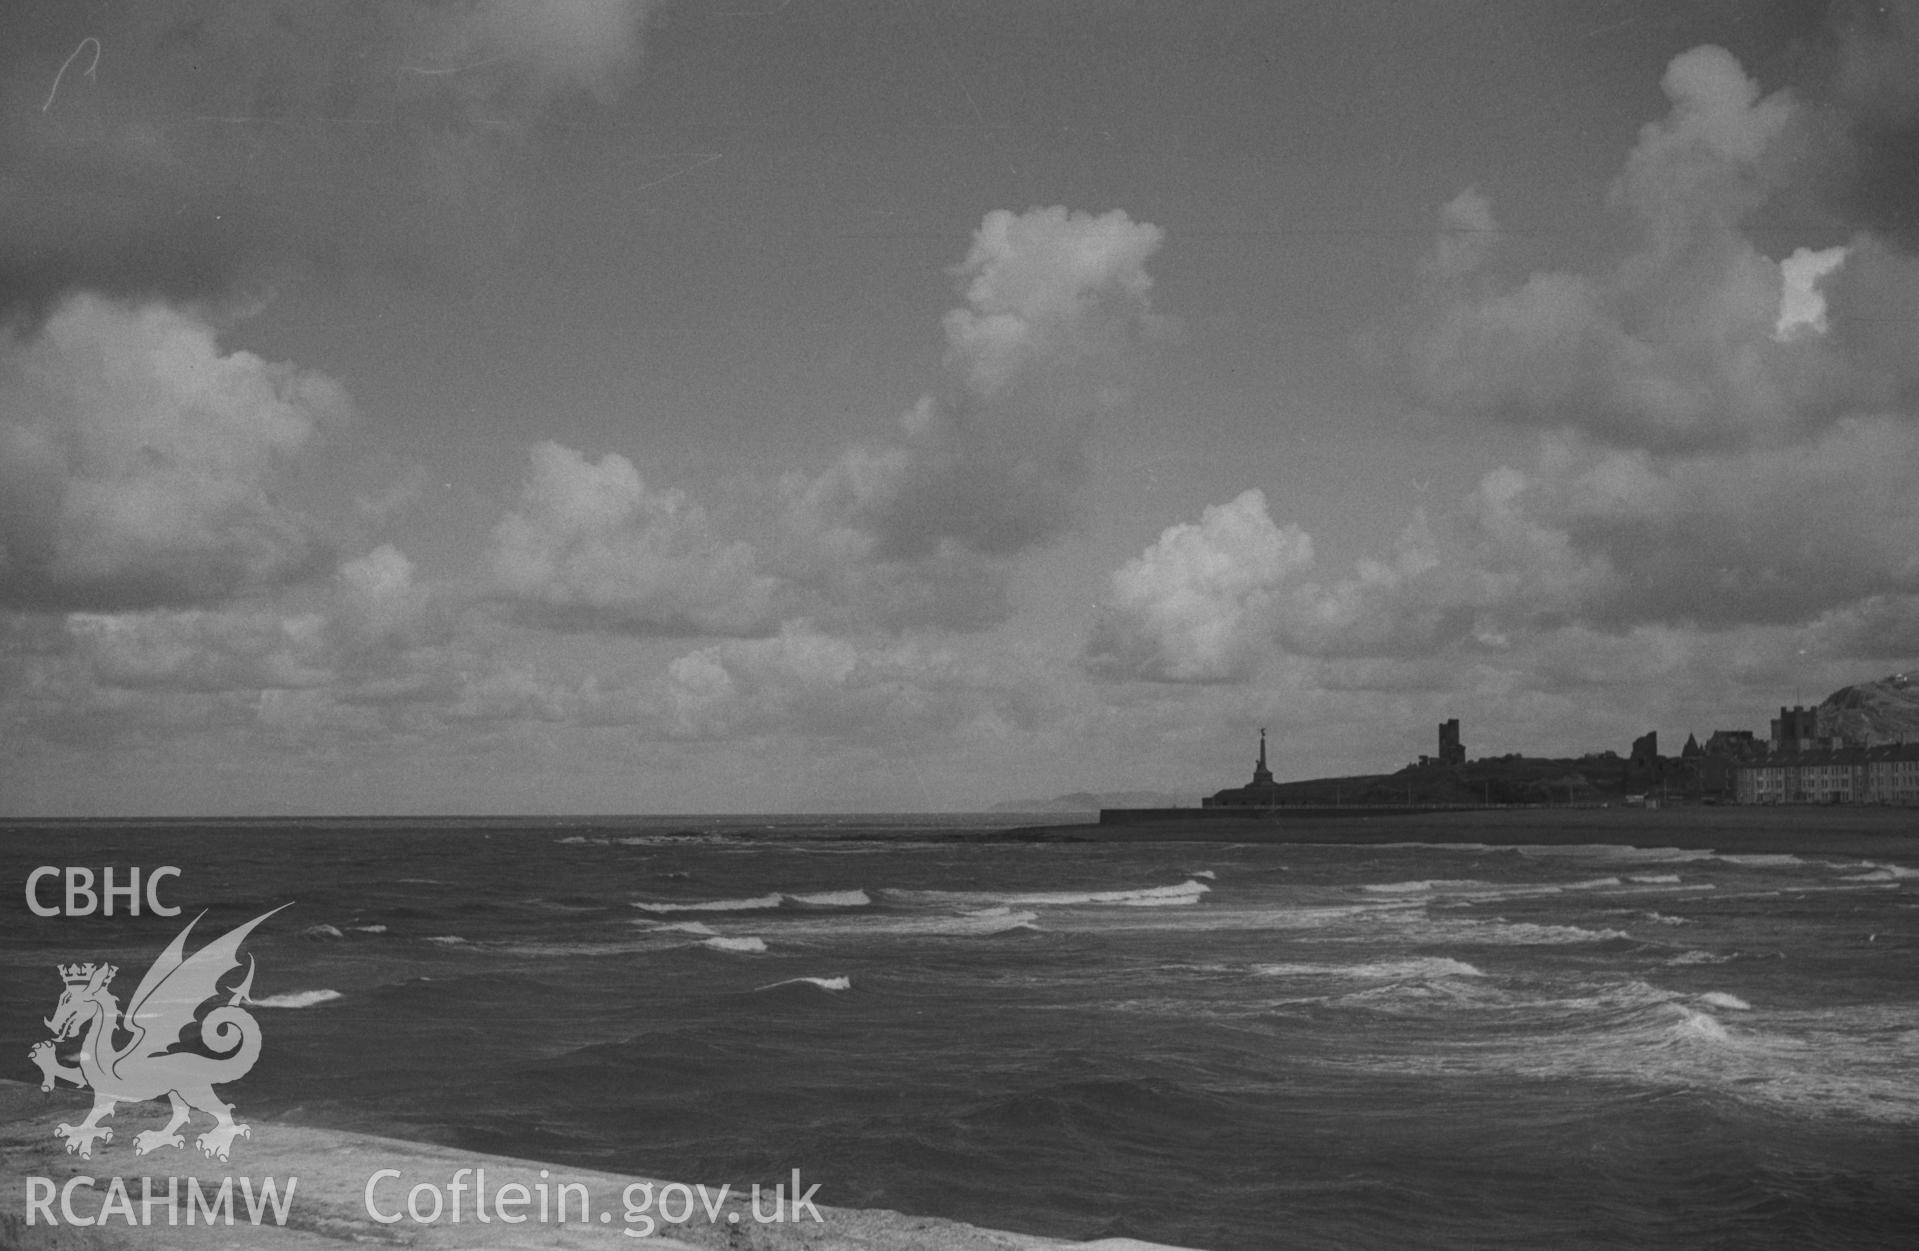 Digital copy of a black and white negative showing view from Tanybwlch pier, Aberystwyth. Photographed by Arthur O. Chater in September 1964 from Grid Reference SN 5785 8078. (Panorama. Photograph 2 of 10).